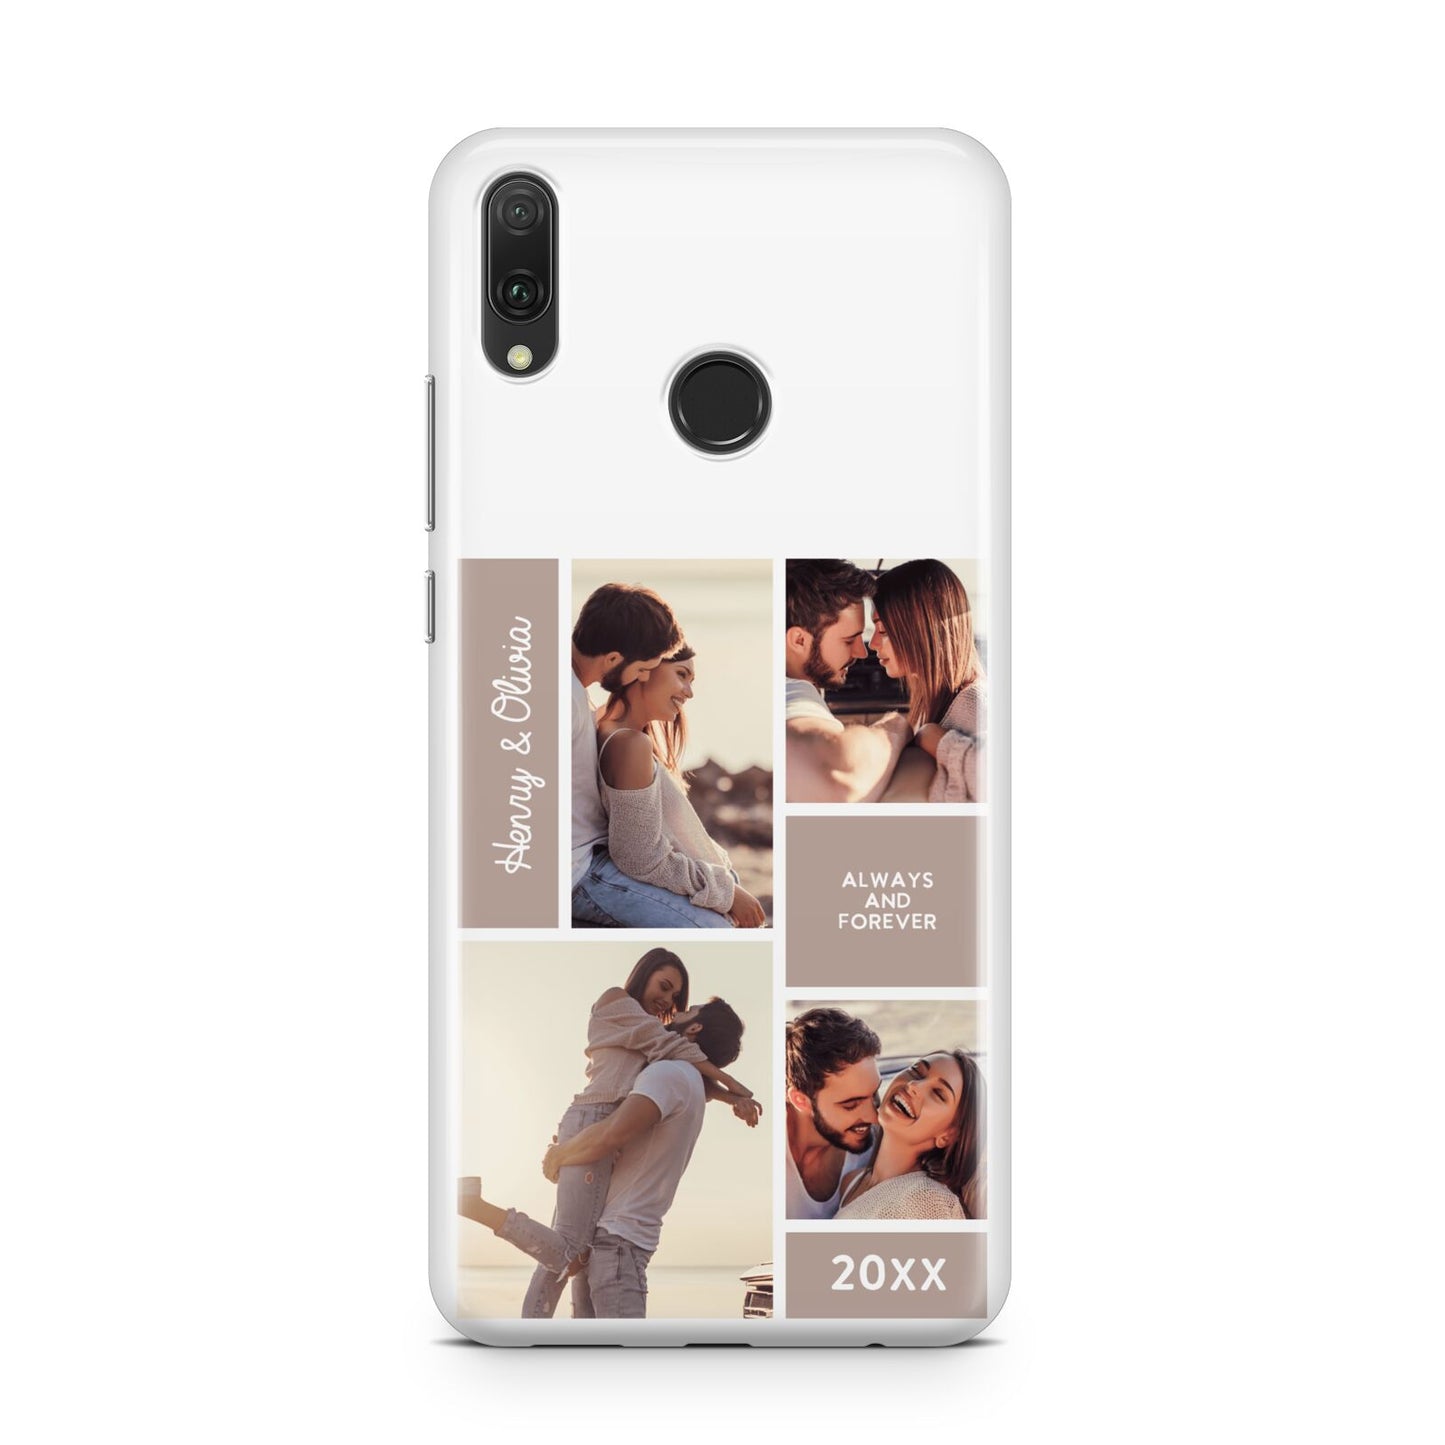 Couples Valentine Photo Collage Personalised Huawei Y9 2019